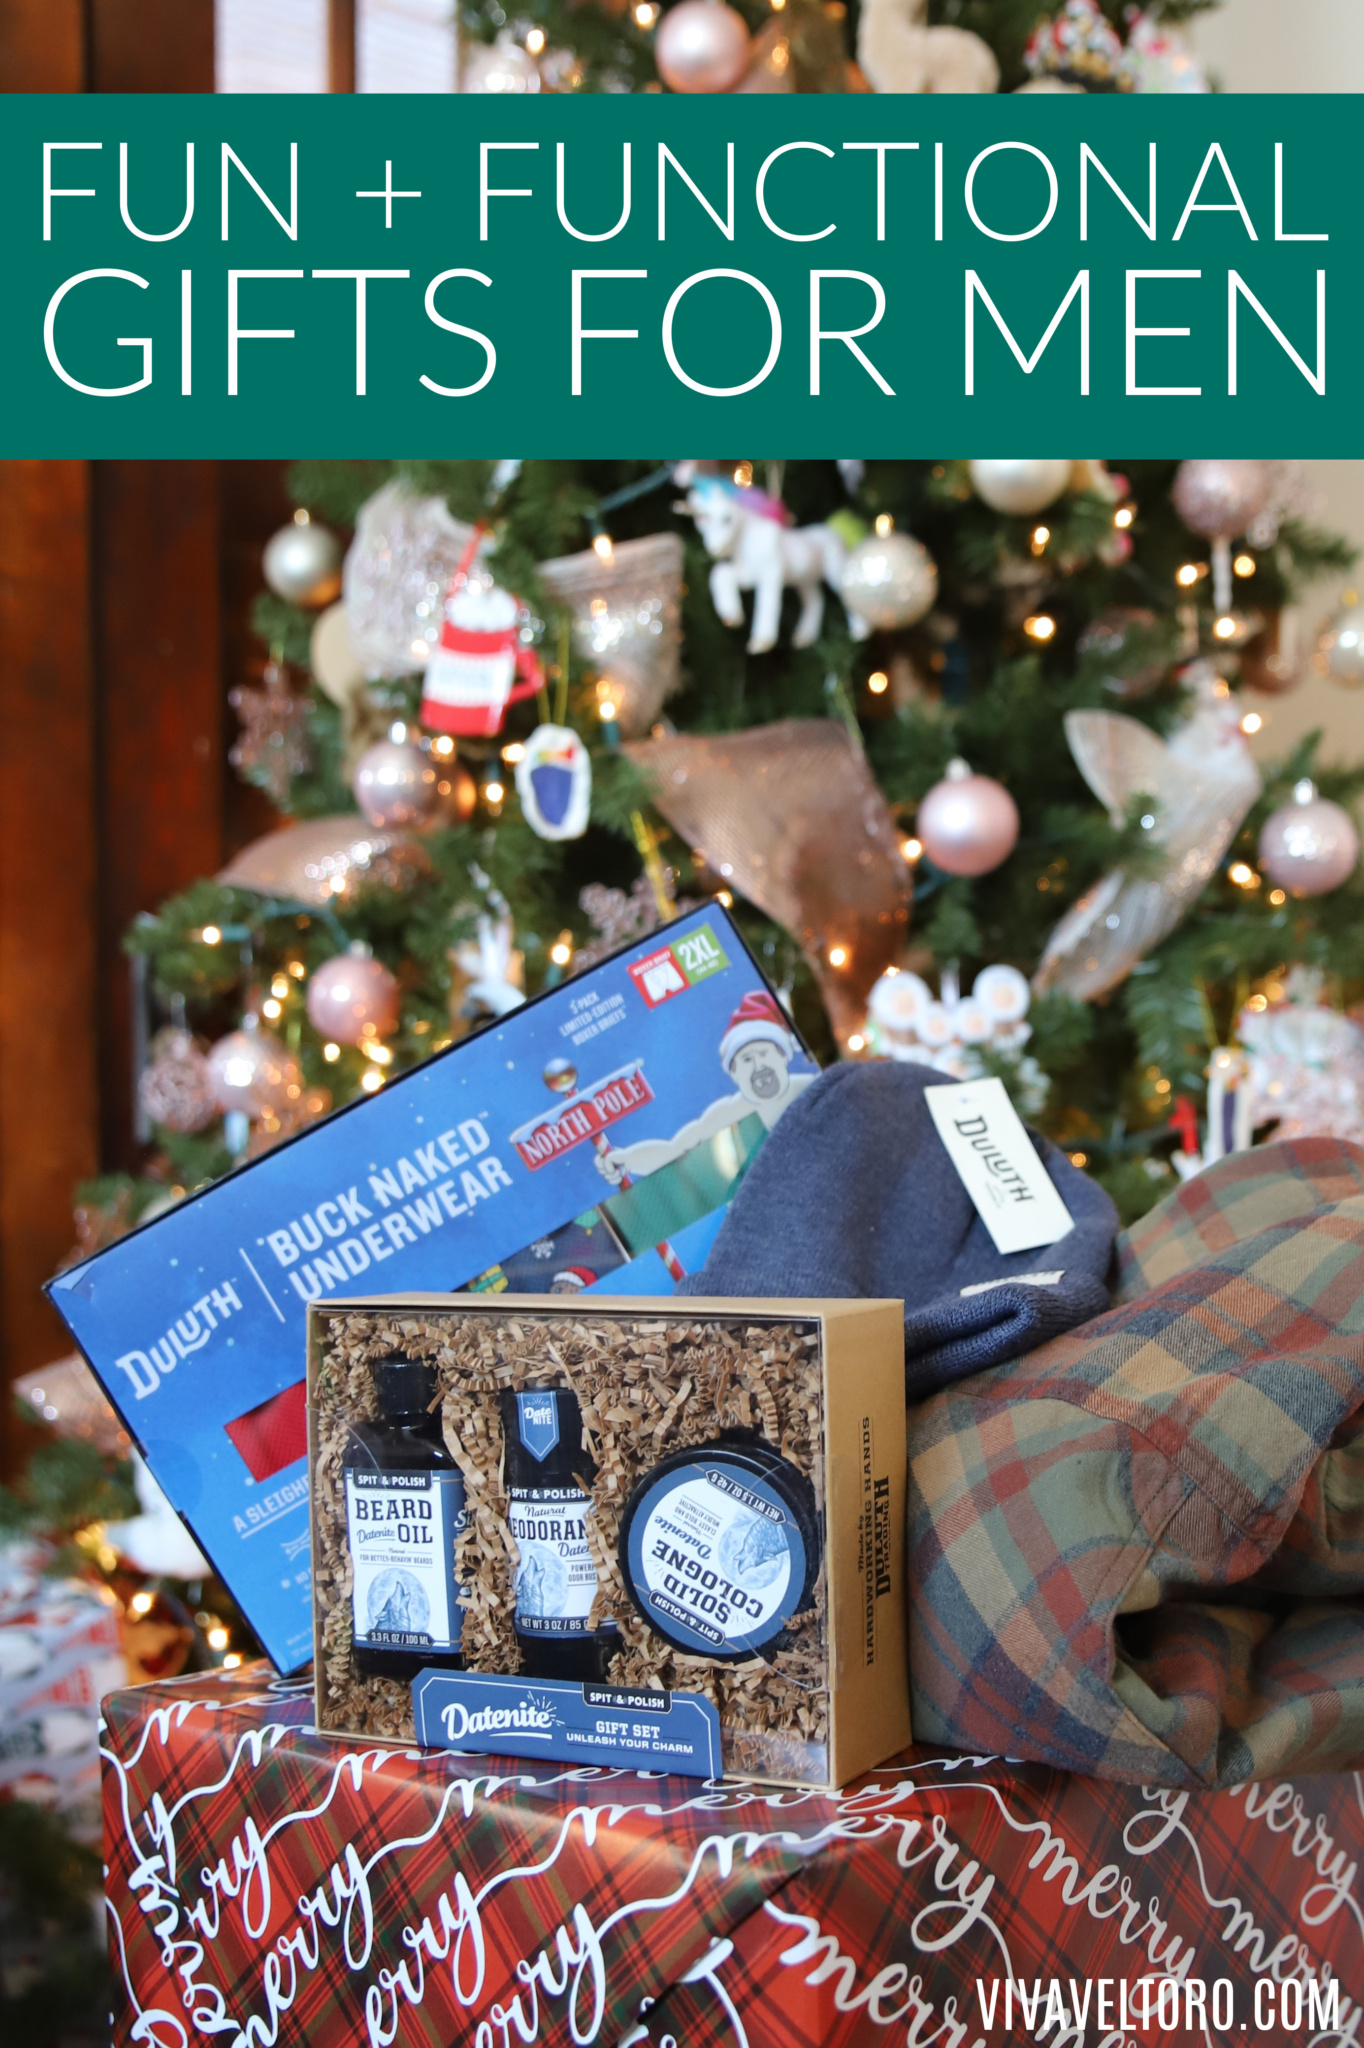 Fun + Functional Gifts for Men from Duluth Trading Company